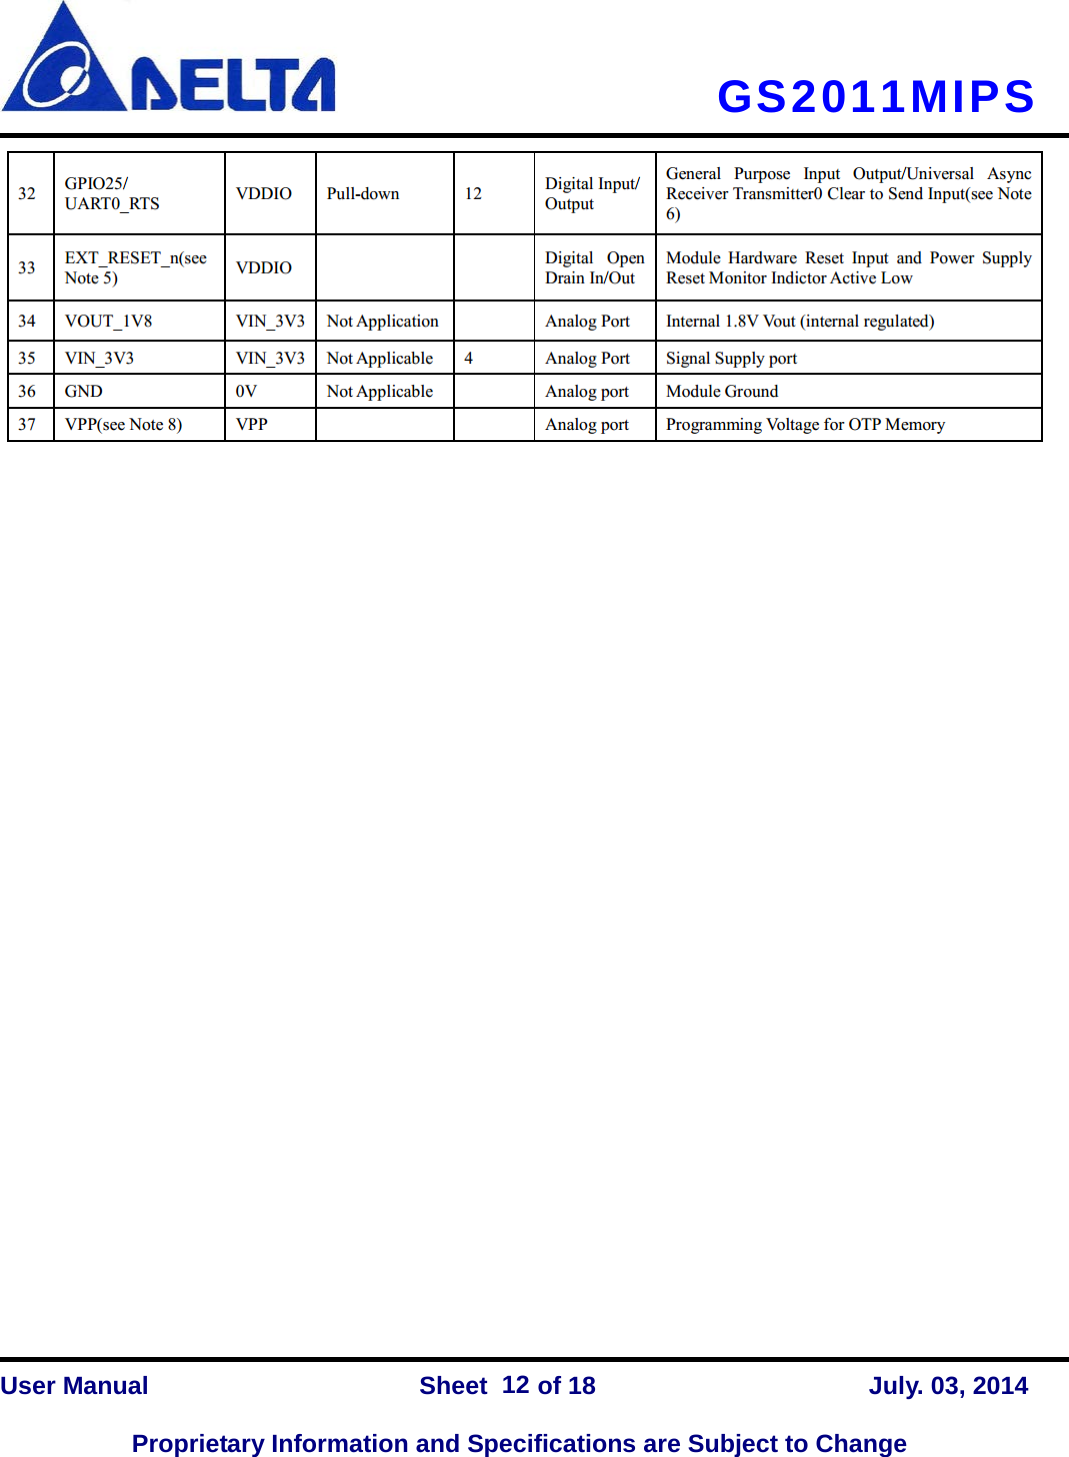     GS2011MIPS                            User Manual                Sheet    of 18      July. 03, 2014  Proprietary Information and Specifications are Subject to Change 12 